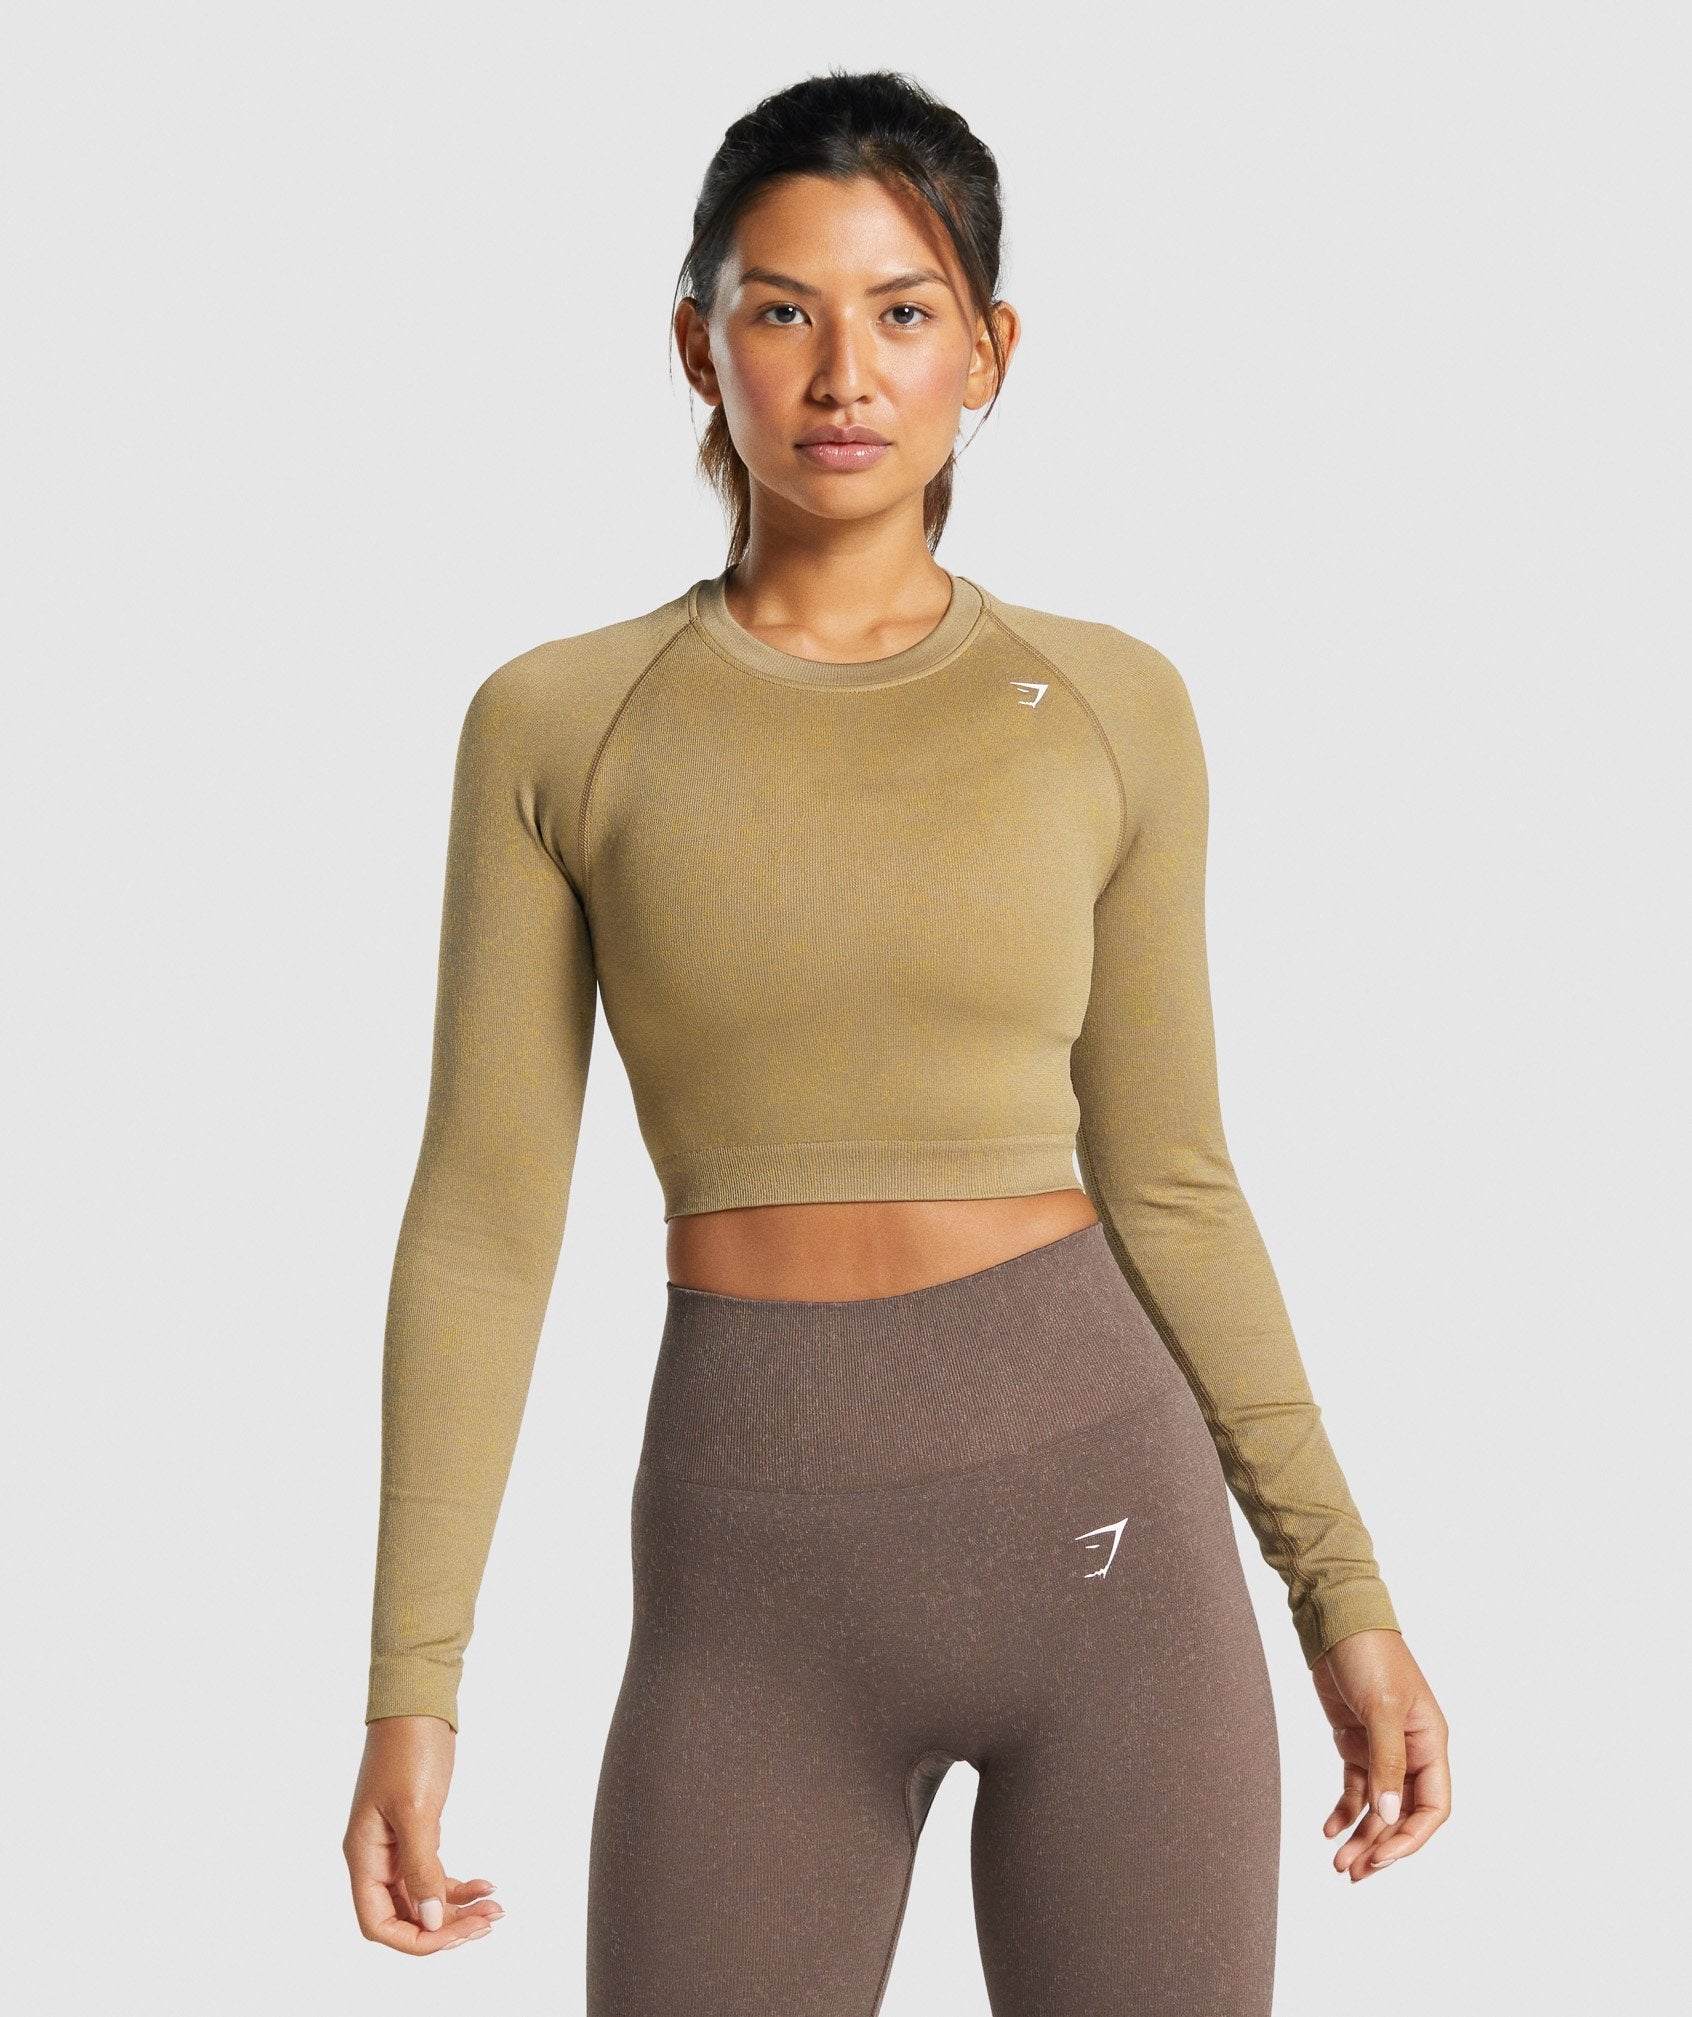 Adapt Fleck Seamless Long Sleeve Crop Top in Mineral | Light Brown - view 1